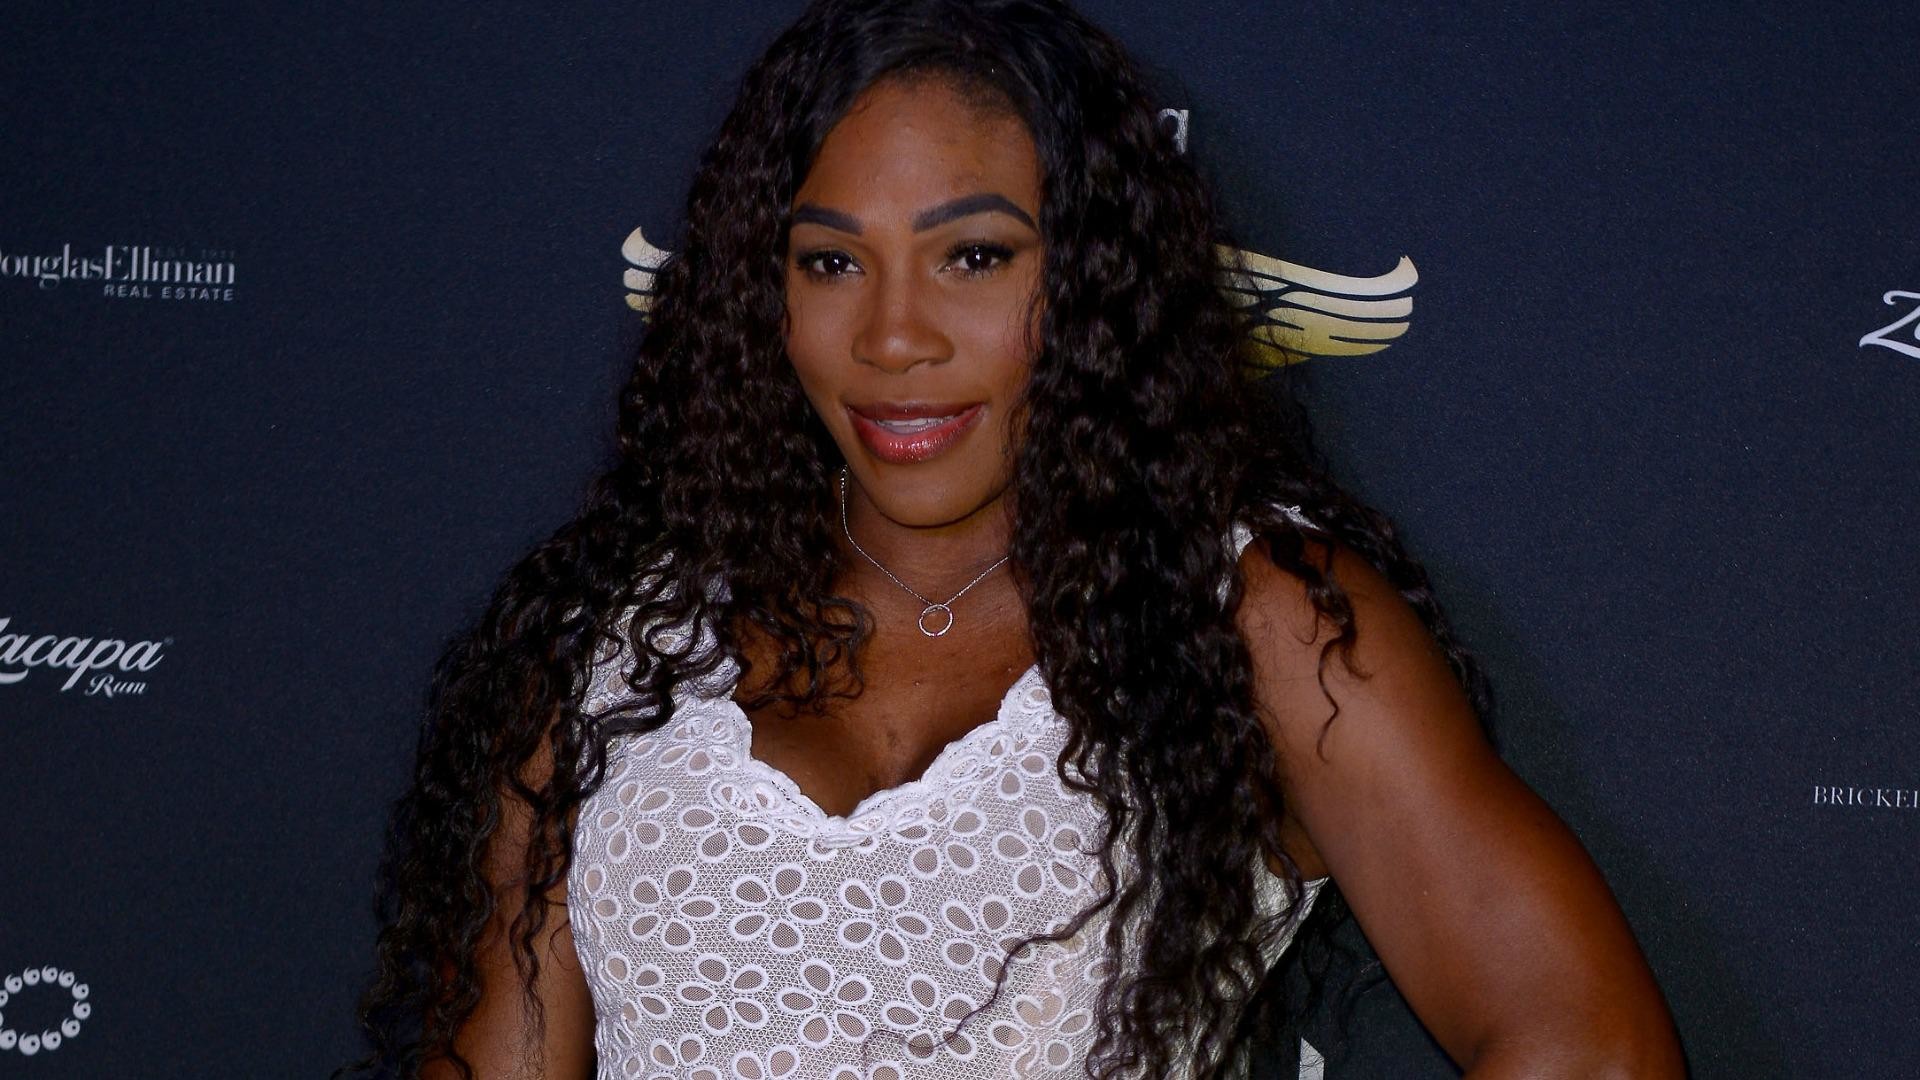 1920x1080 The Serena Williams 'twirl' request got blown way out of proportion